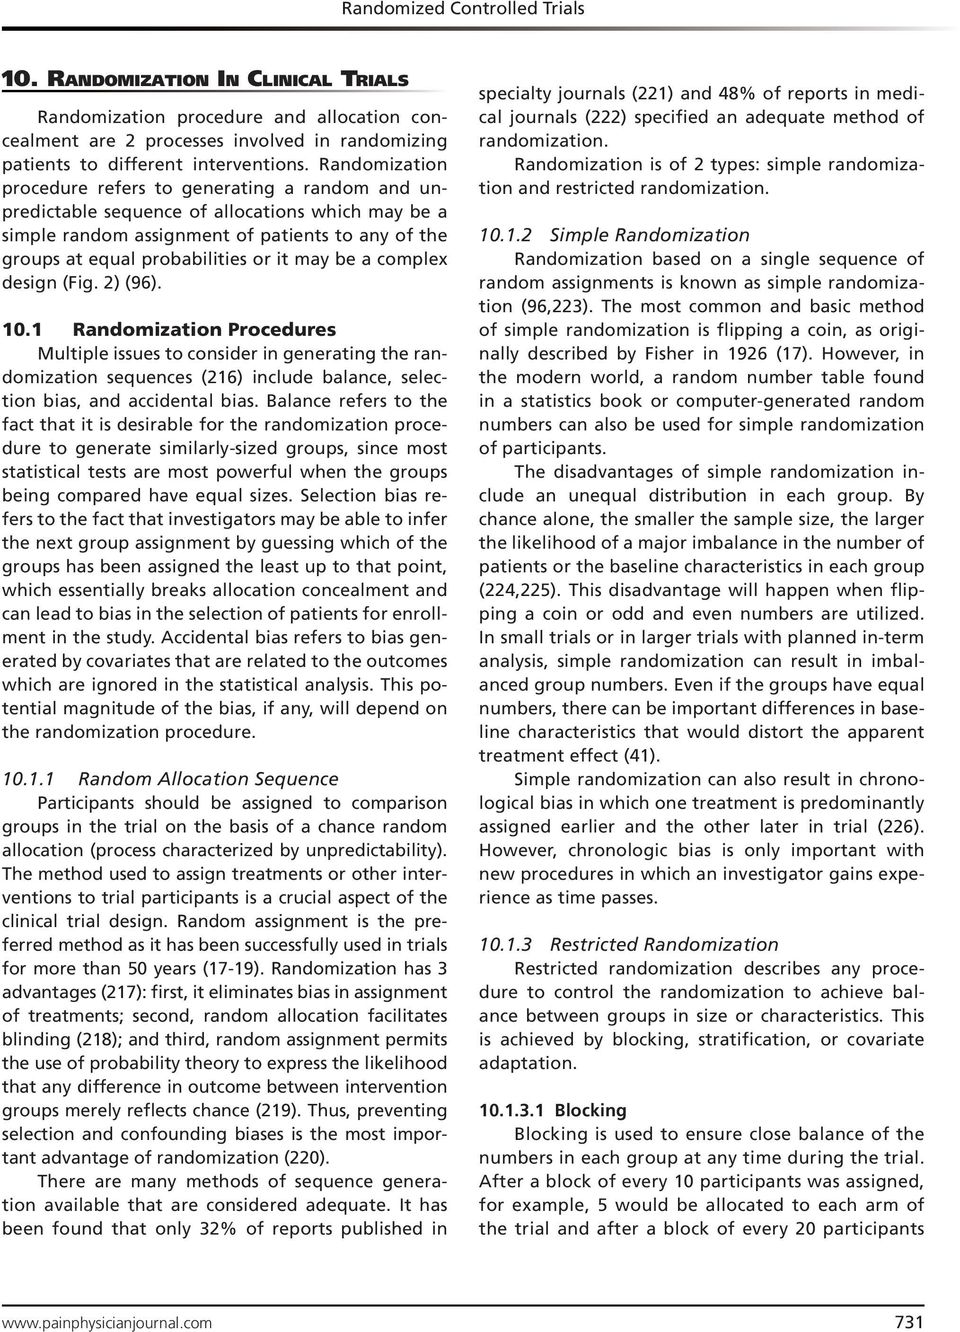 may be a complex design (Fig. 2) (96). 10.1 Randomization Procedures Multiple issues to consider in generating the randomization sequences (216) include balance, selection bias, and accidental bias.